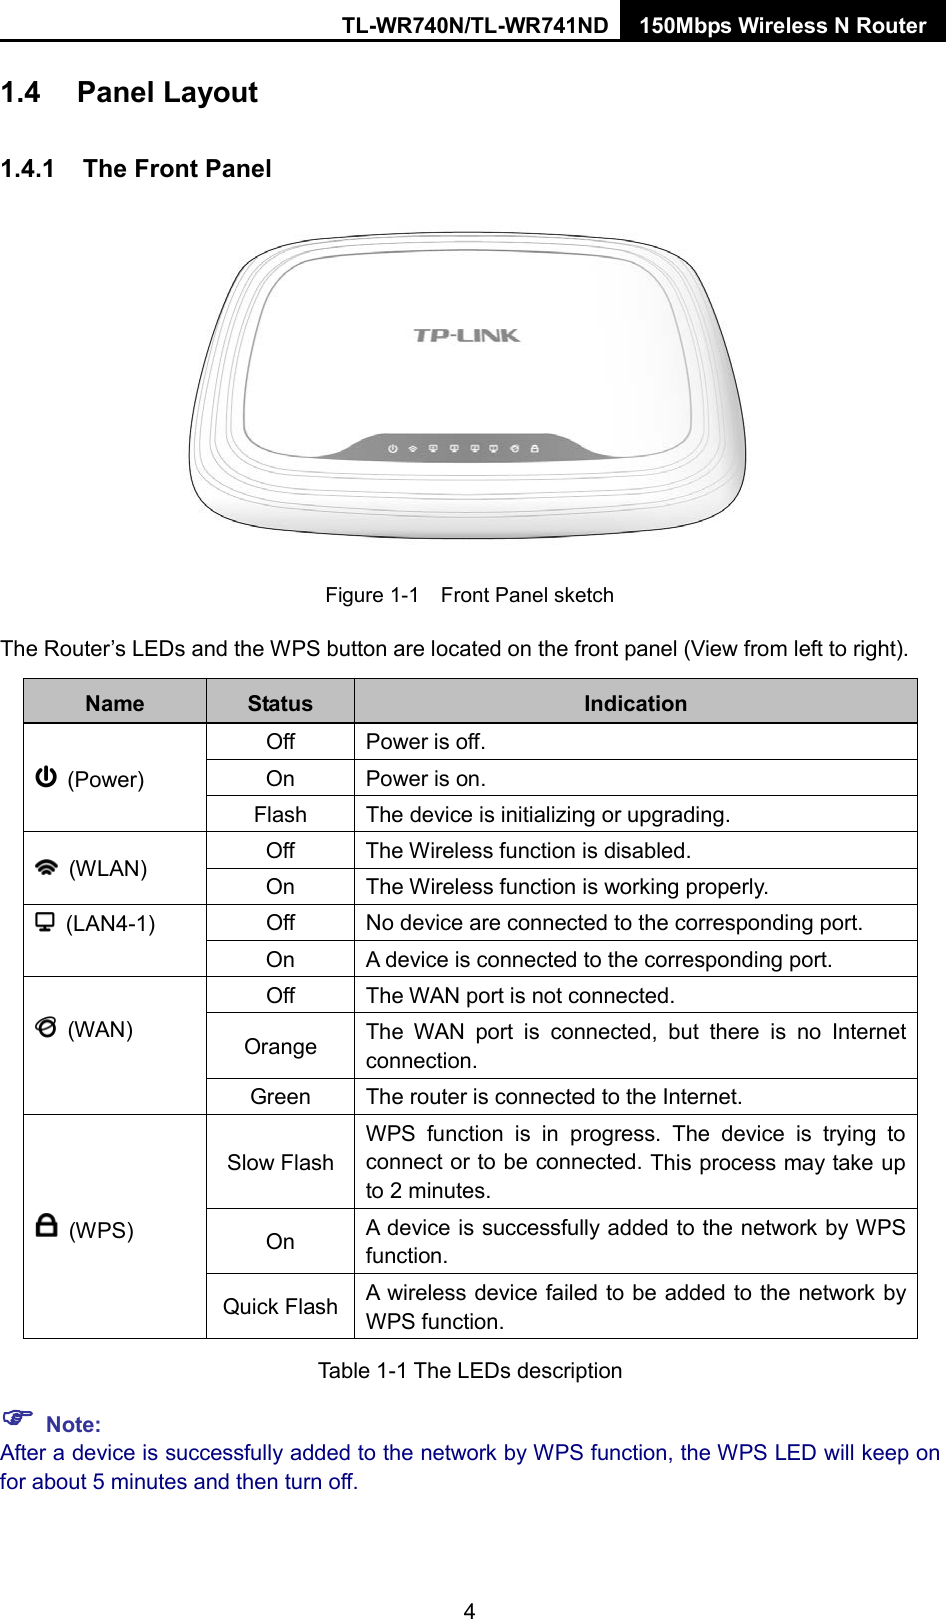 TL-WR740N/TL-WR741ND 150Mbps Wireless N Router  1.4 Panel Layout 1.4.1 The Front Panel  Figure 1-1  Front Panel sketch The Router’s LEDs and the WPS button are located on the front panel (View from left to right).   Name Status Indication  (Power) Off Power is off. On Power is on. Flash The device is initializing or upgrading.  (WLAN) Off The Wireless function is disabled. On The Wireless function is working properly.  (LAN4-1)  Off No device are connected to the corresponding port. On A device is connected to the corresponding port.   (WAN)  Off The WAN port is not connected. Orange The WAN port is connected, but there is no Internet connection. Green The router is connected to the Internet.   (WPS) Slow Flash WPS function is in progress. The device is trying to connect or to be connected. This process may take up to 2 minutes. On A device is successfully added to the network by WPS function. Quick Flash A wireless device failed to be added to the network by WPS function. Table 1-1 The LEDs description  Note: After a device is successfully added to the network by WPS function, the WPS LED will keep on for about 5 minutes and then turn off. 4 